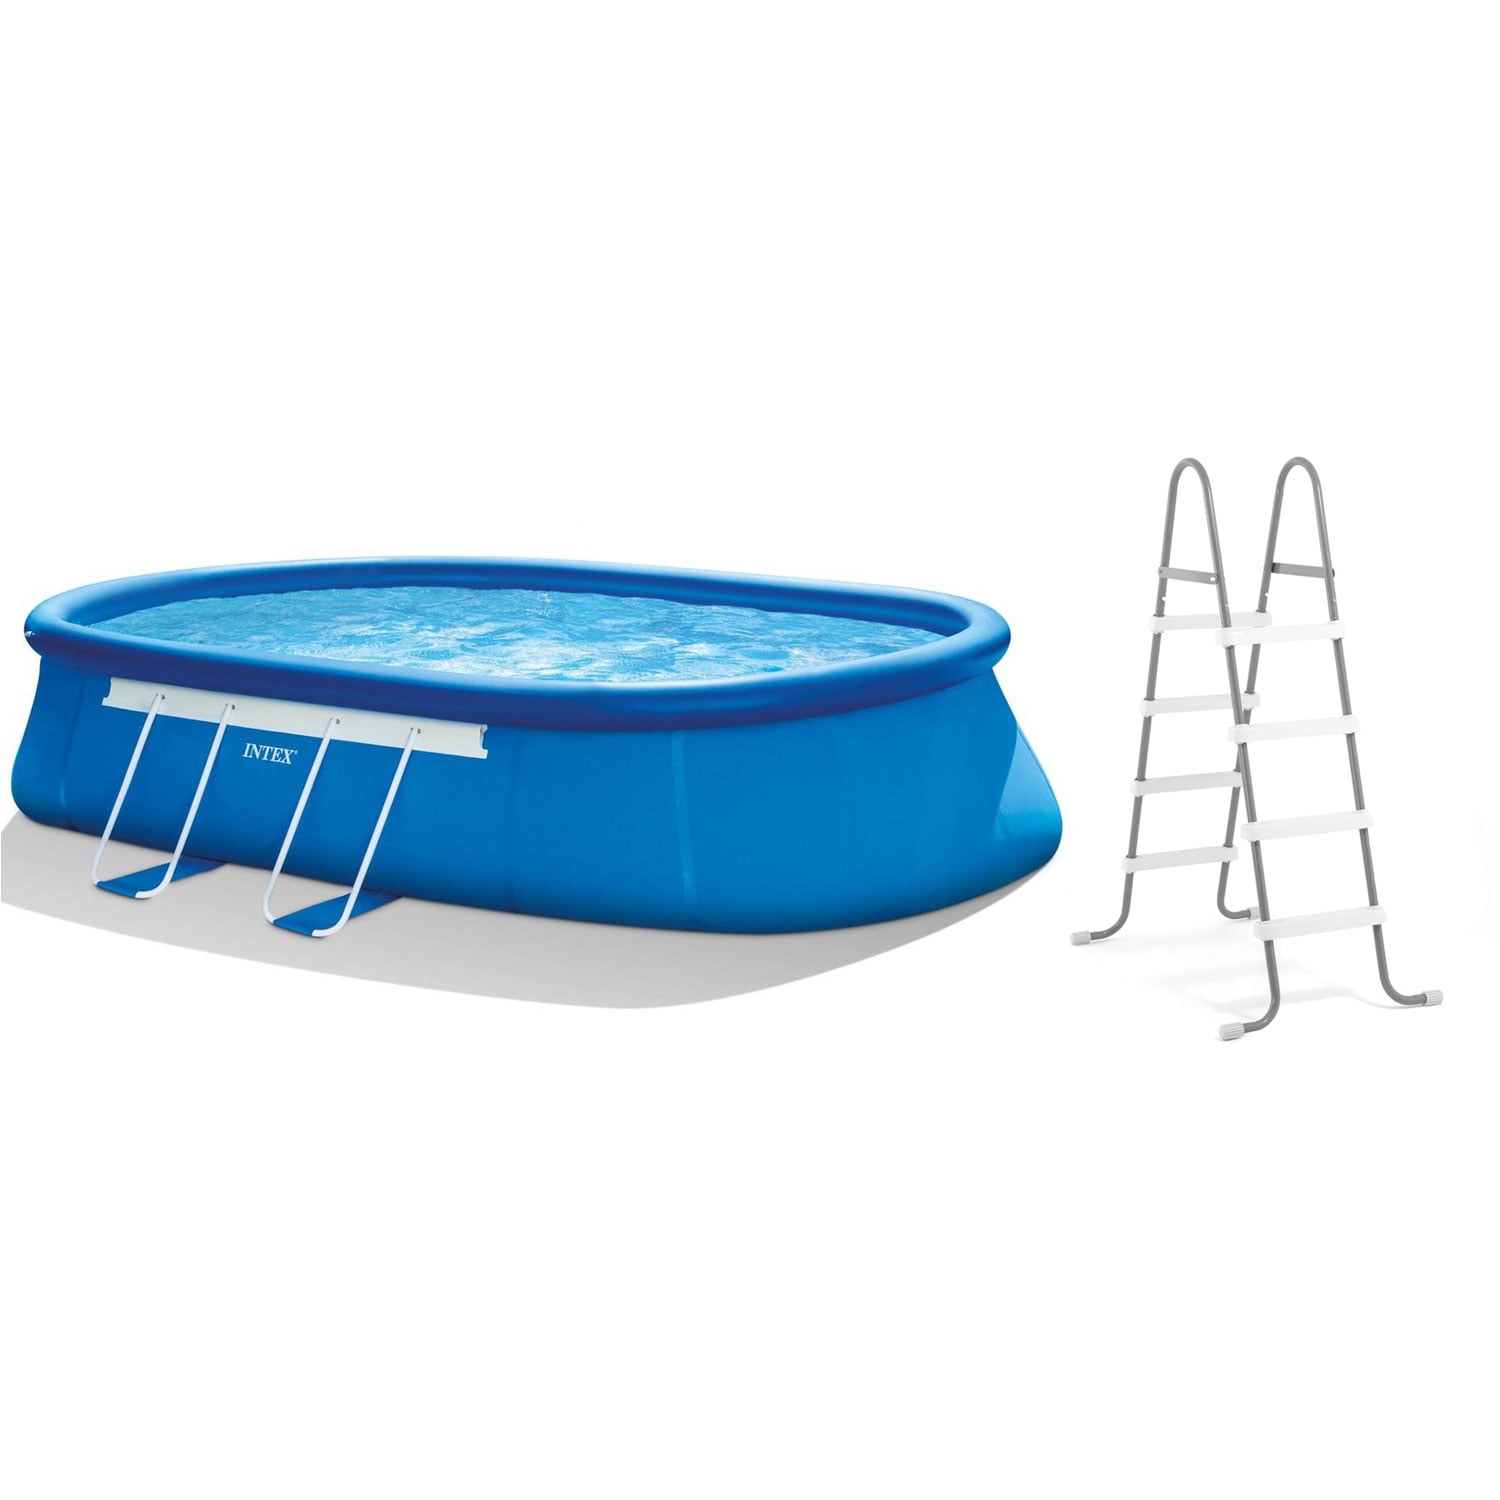 Intex 12ft x 48in Oval Frame Swimming Set with 1500 GPH Filter - Walmart.com